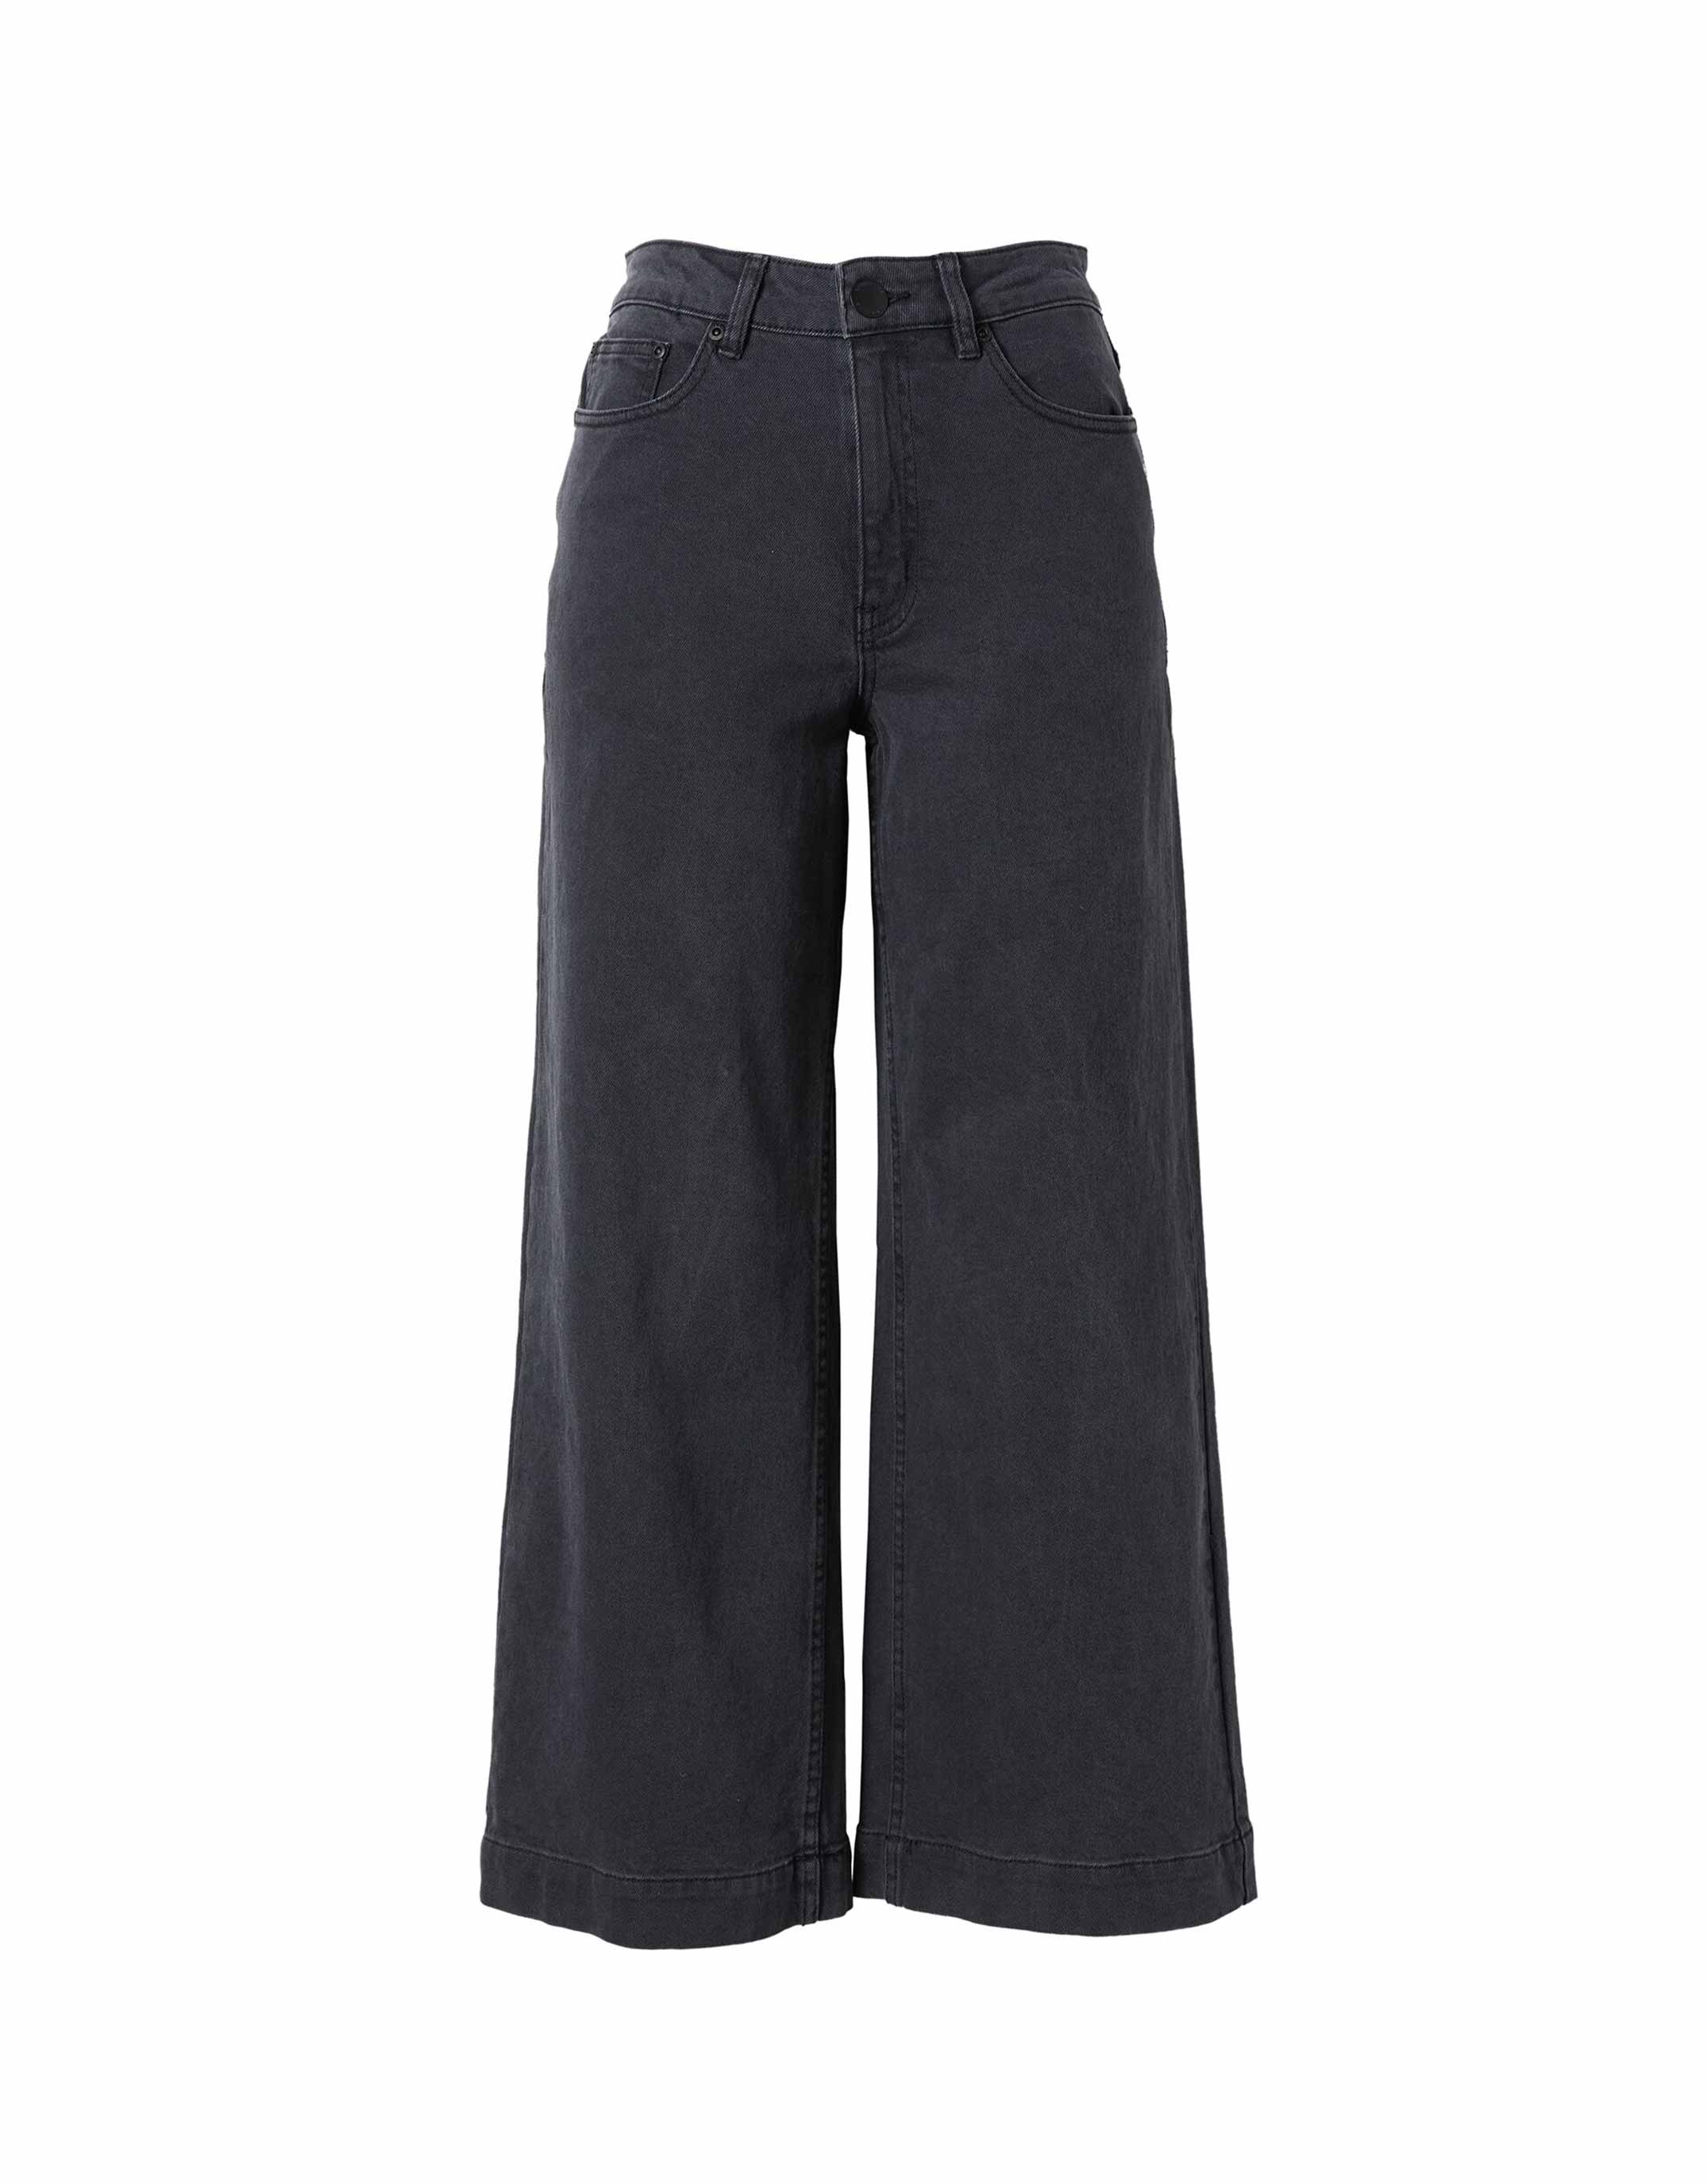 ceres-life-core-wide-leg-jean-washed-black-womens-clothing